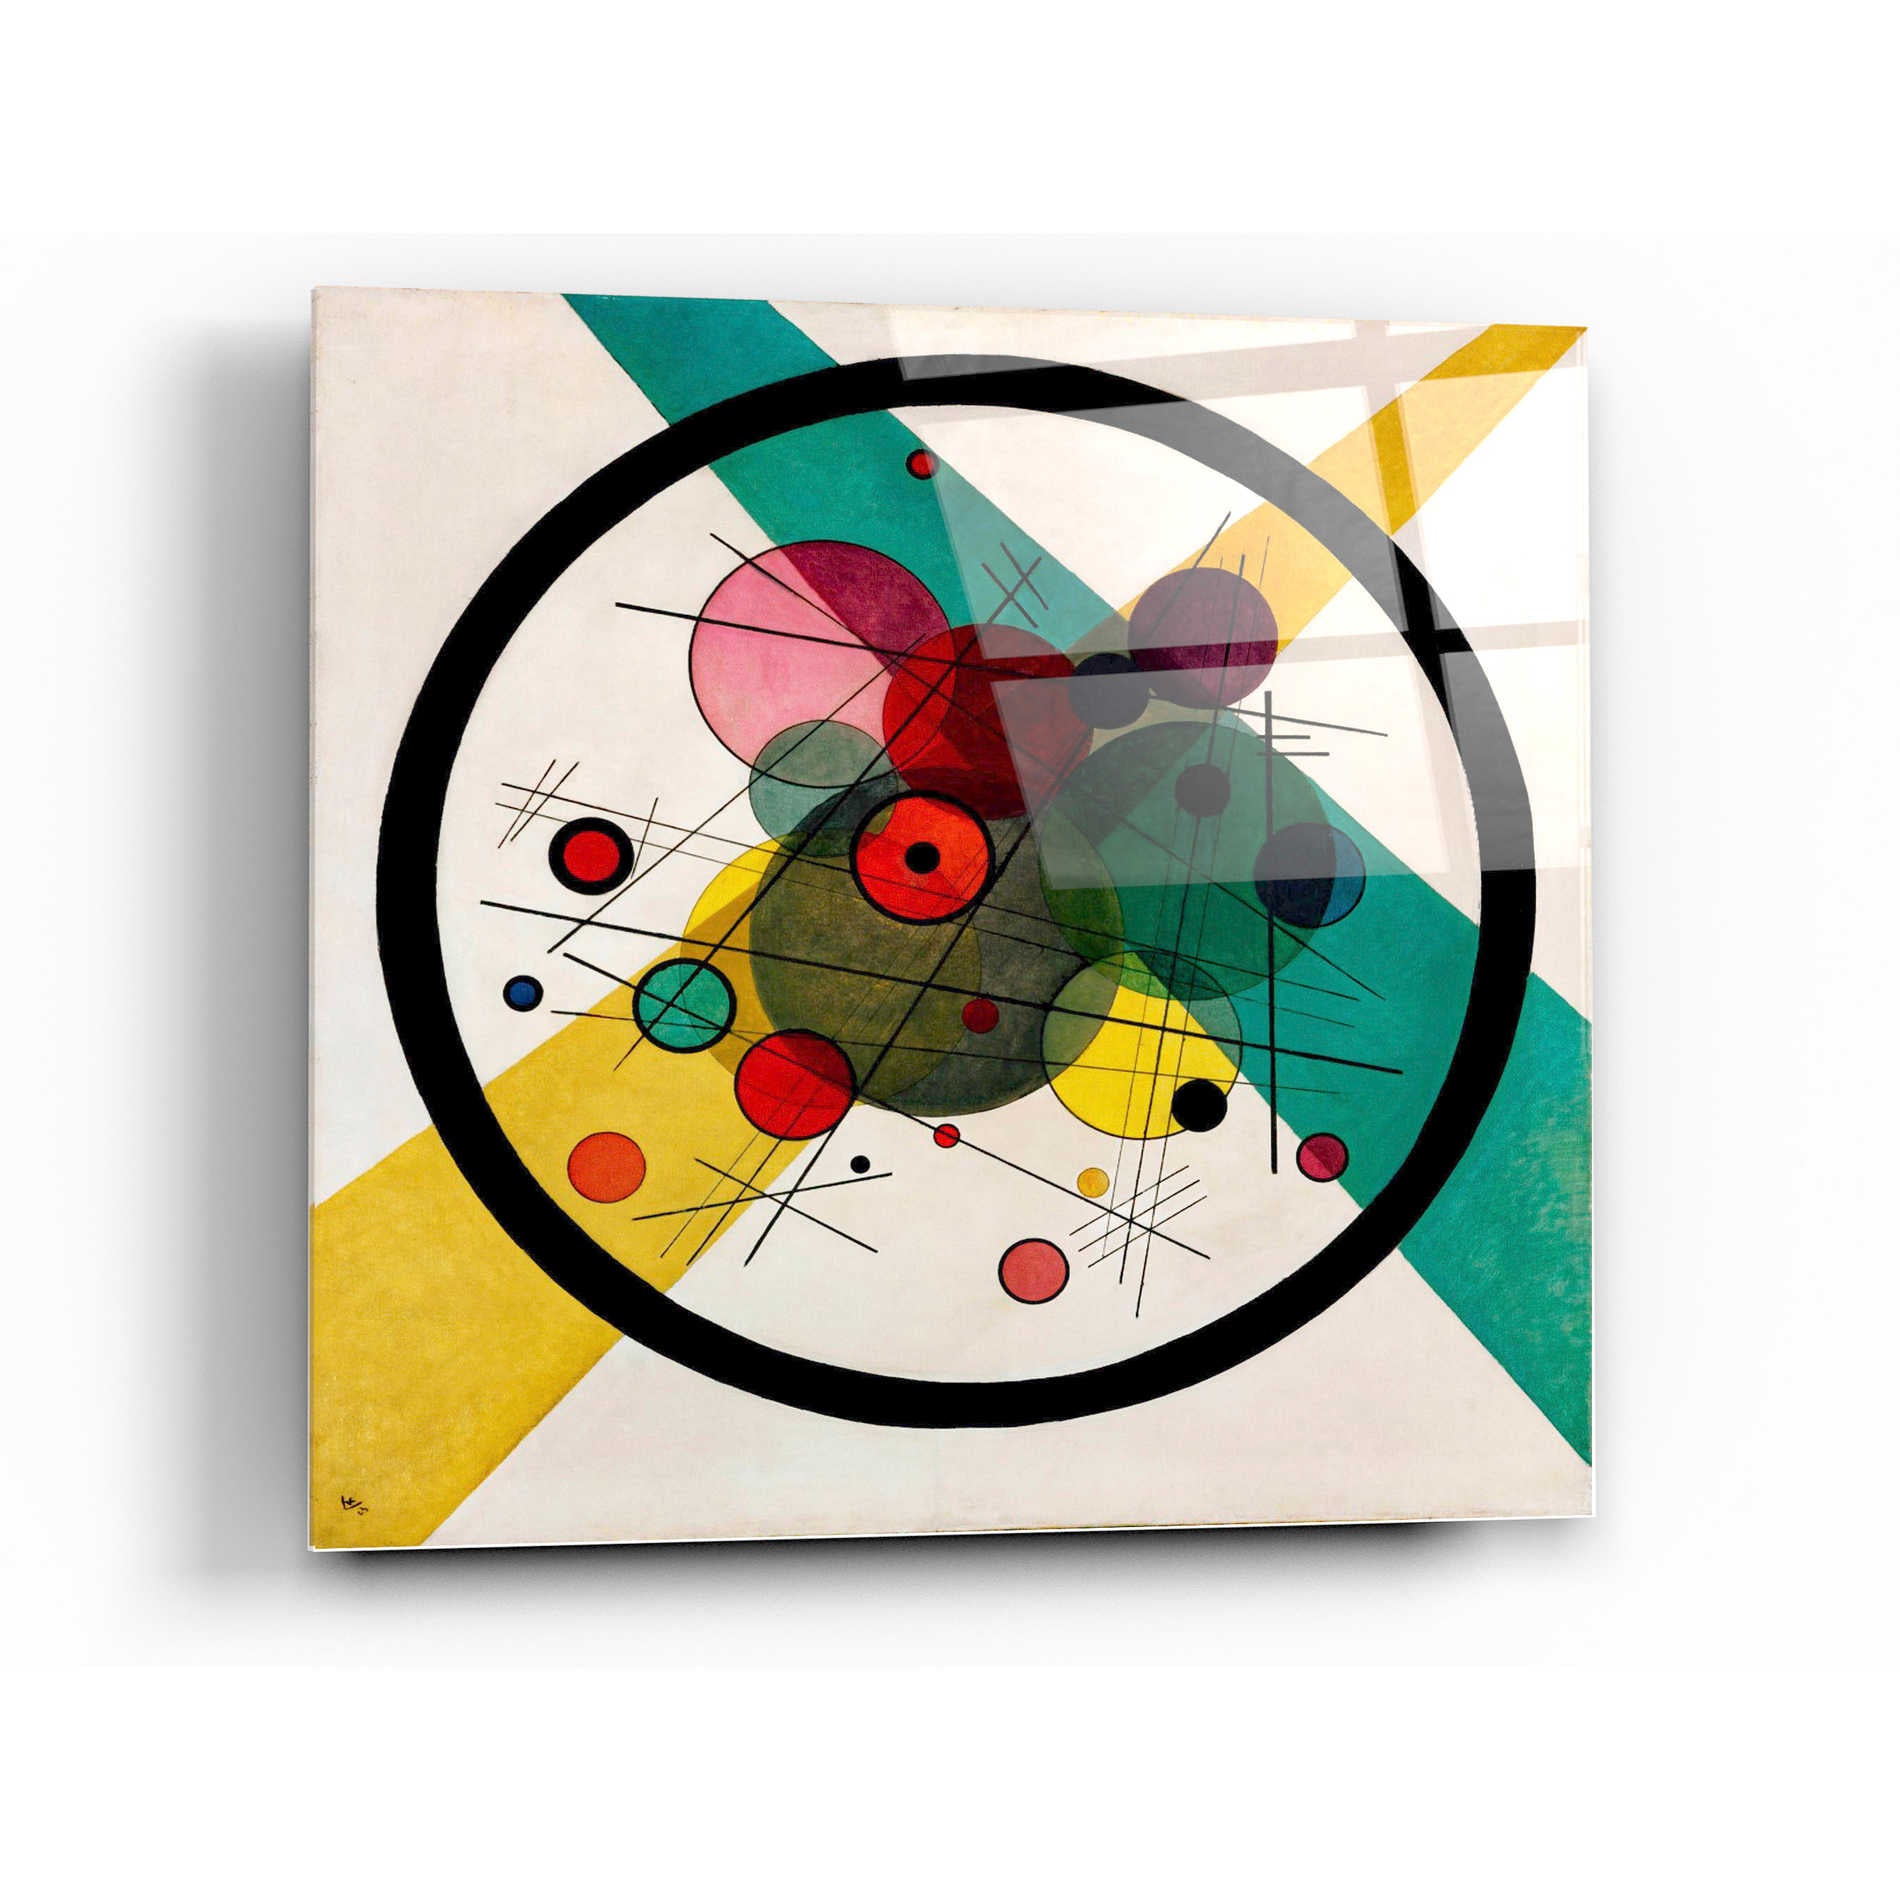 Epic Art 'Circles In A Circle' by Wassily Kandinsky Acrylic Glass Wall Art,24x24